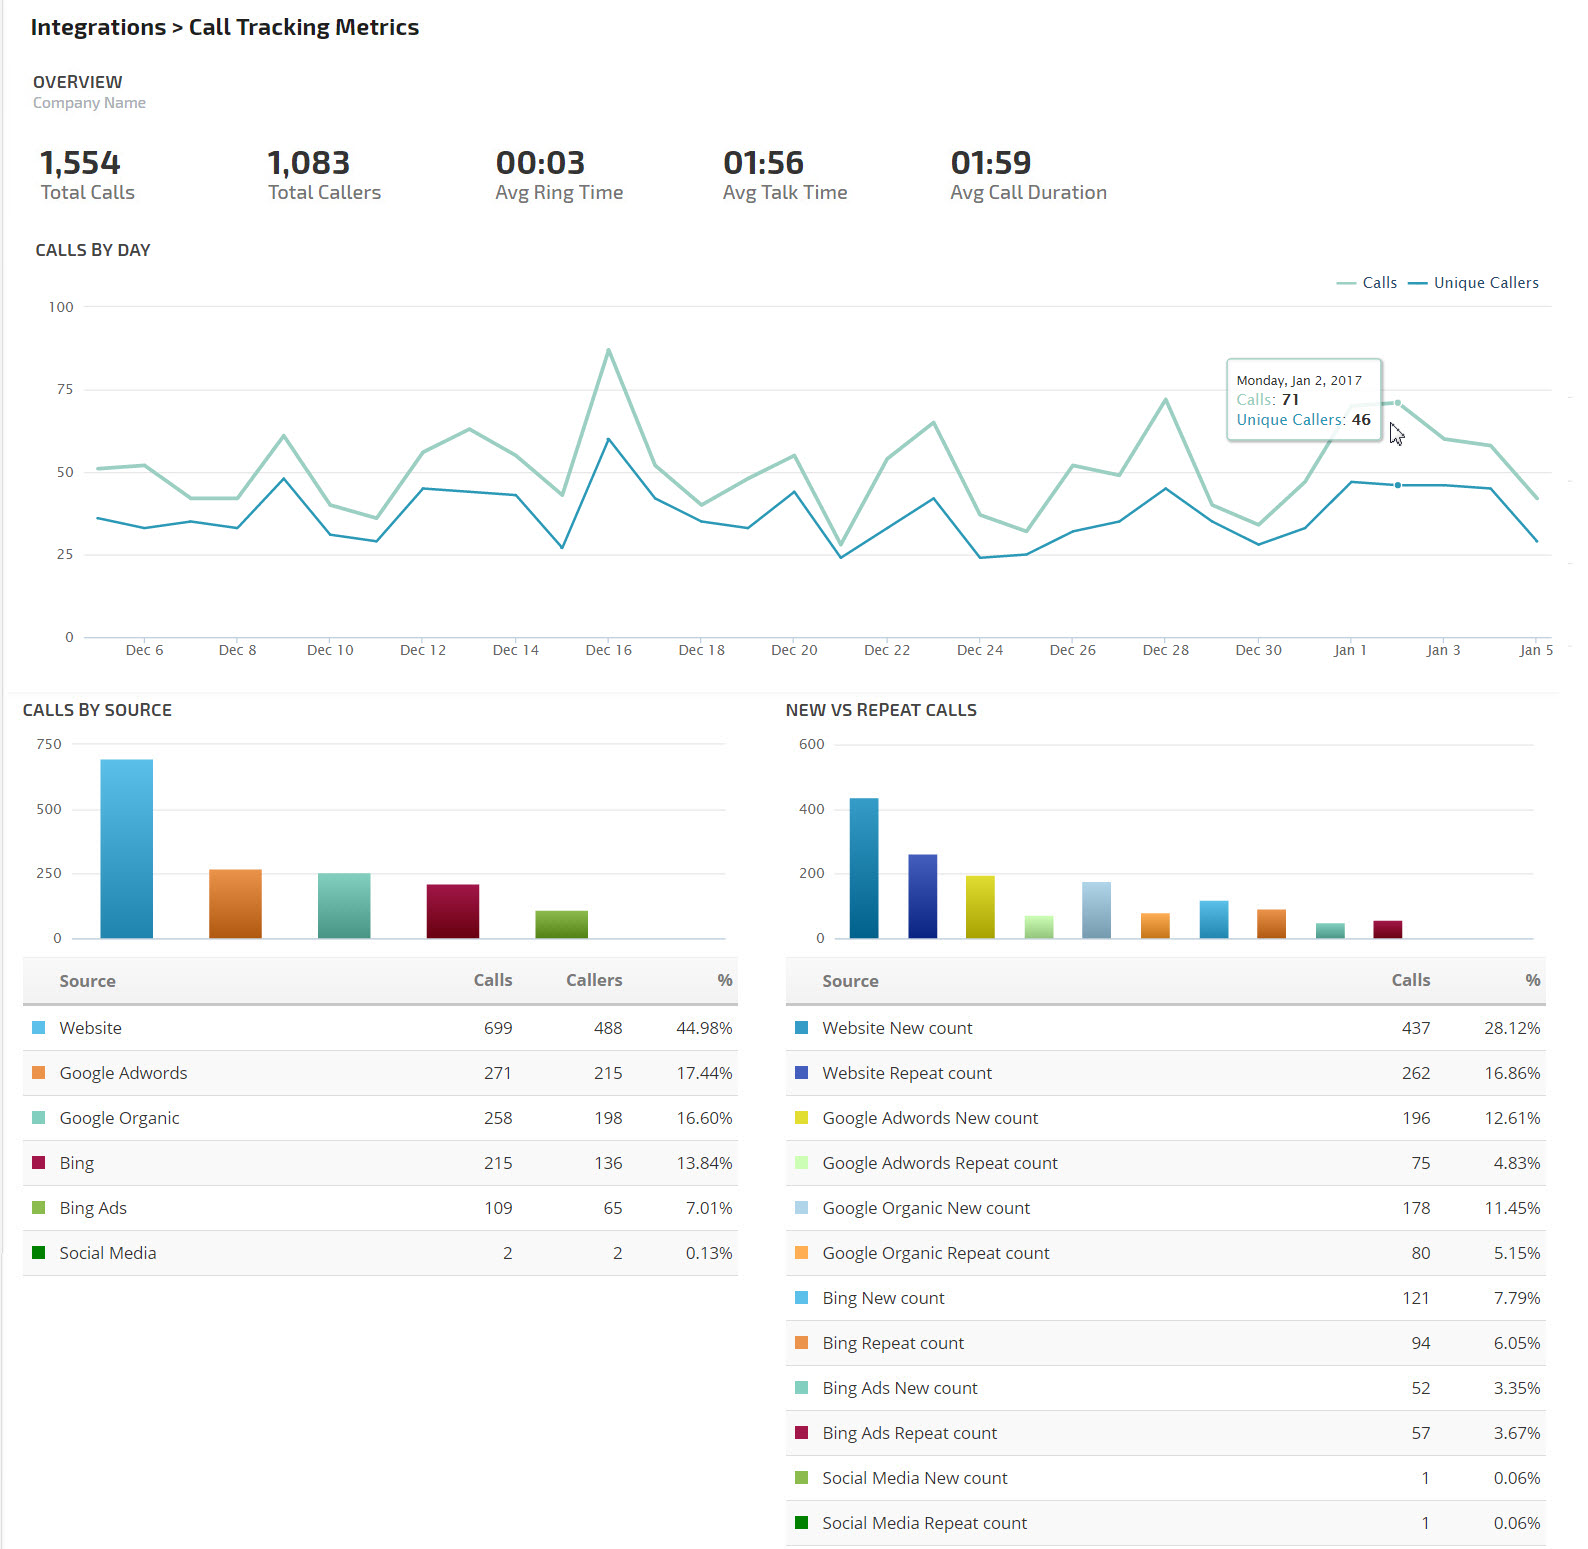 Call Tracking Metrics overview report